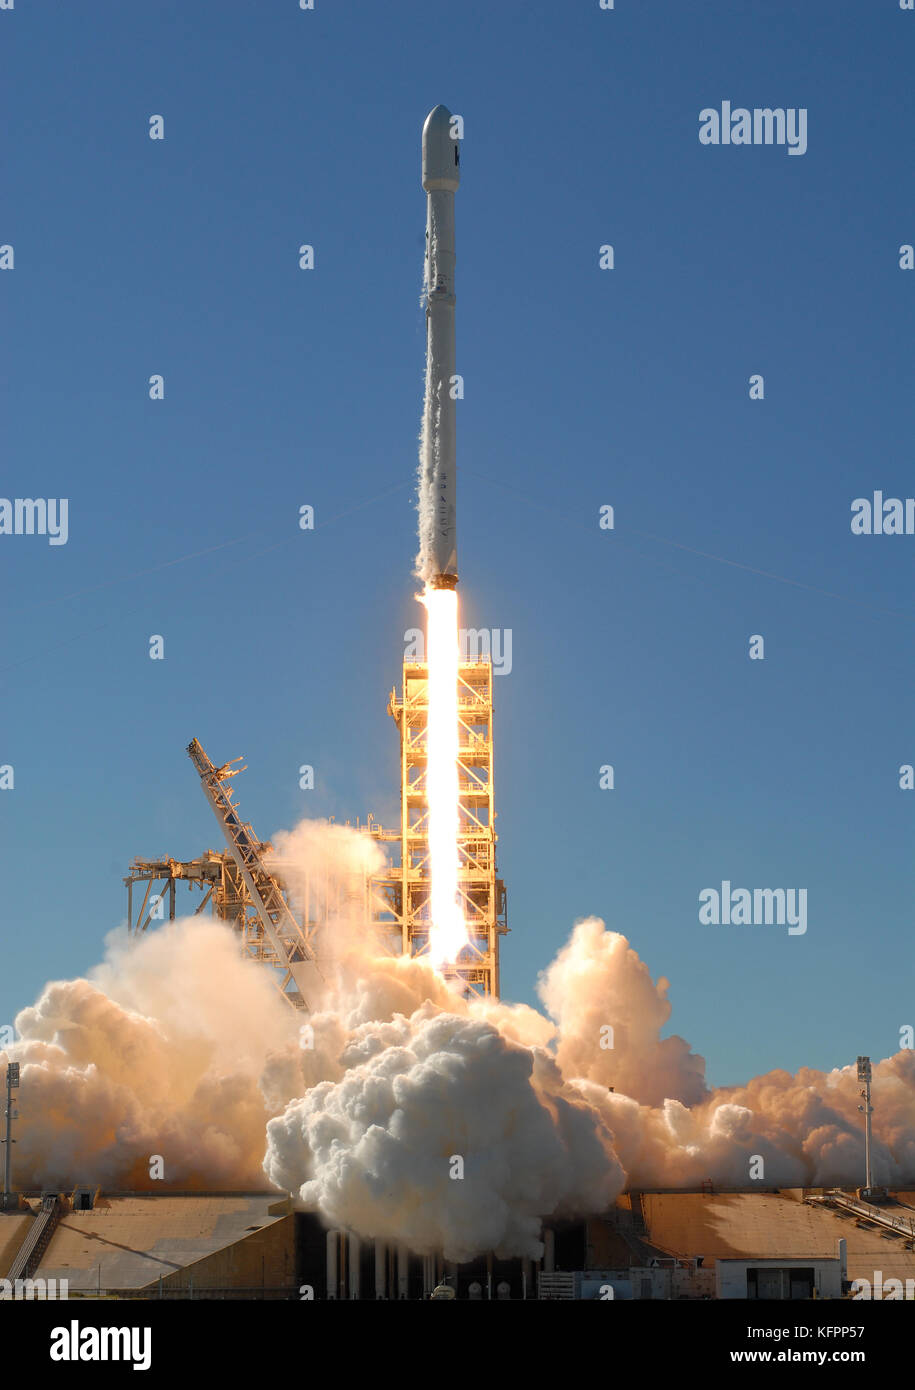 Cape Canaveral, Florida, USA. 30th Oct, 2017. SpaceX launches a Falcon 9 rocket carrying the KoreaSat-5A communications satellite from Pad 39A at NASA's Kennedy Space Center on October 30, 2017 in Florida.  The first stage of the rocket landed about 10 minutes after liftoff on a SpaceX drone ship in the Atlantic ocean. The satellite will provide TV and other communications services to people in South Korea, Japan, and Southeast Asia. Credit: Paul Hennessy/Alamy Live News Stock Photo